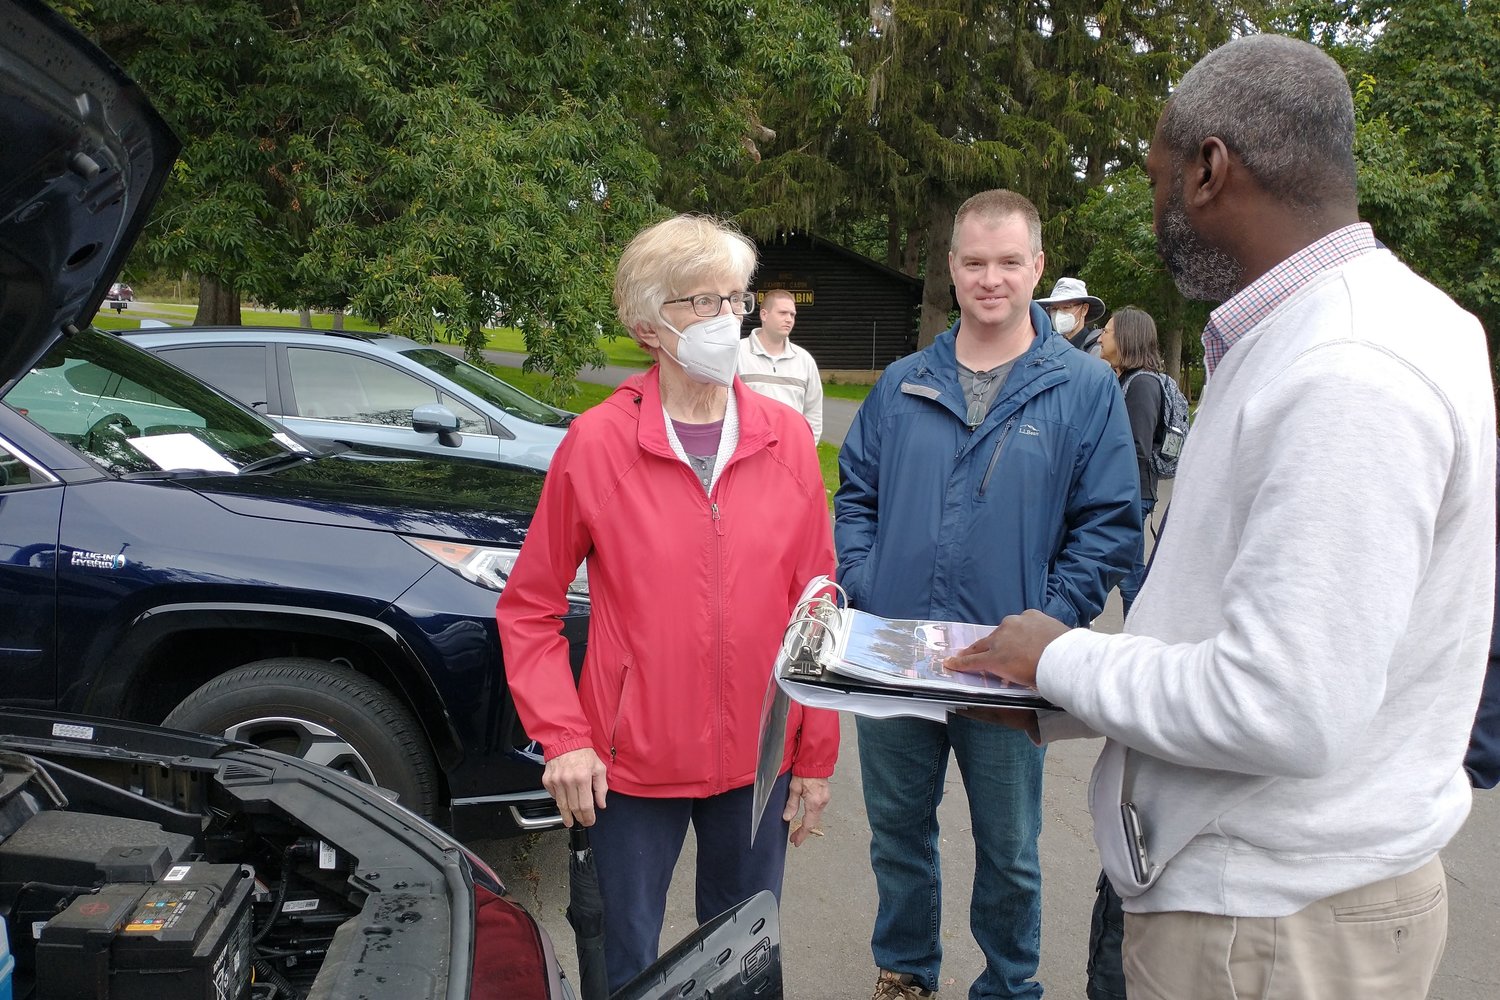 The 4th annual Electric Car Show kicks off on Saturday, Oct. 1 from 11 a.m. to 3 p.m. at Rogers Environmental Education Center in Sherburne. Attendees can speak with electric vehicle owners and even get a ride along.